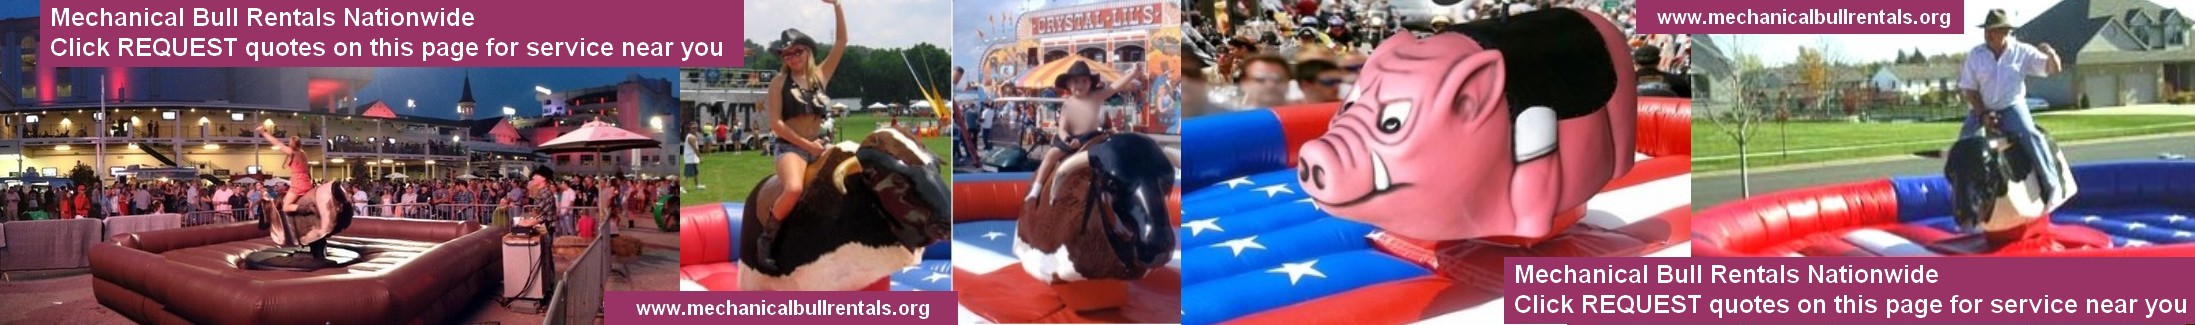 Mechanical Bull Rentals Appleton Wisconsin WI and near you. Free referrals to local mechanical bull companies LOGO